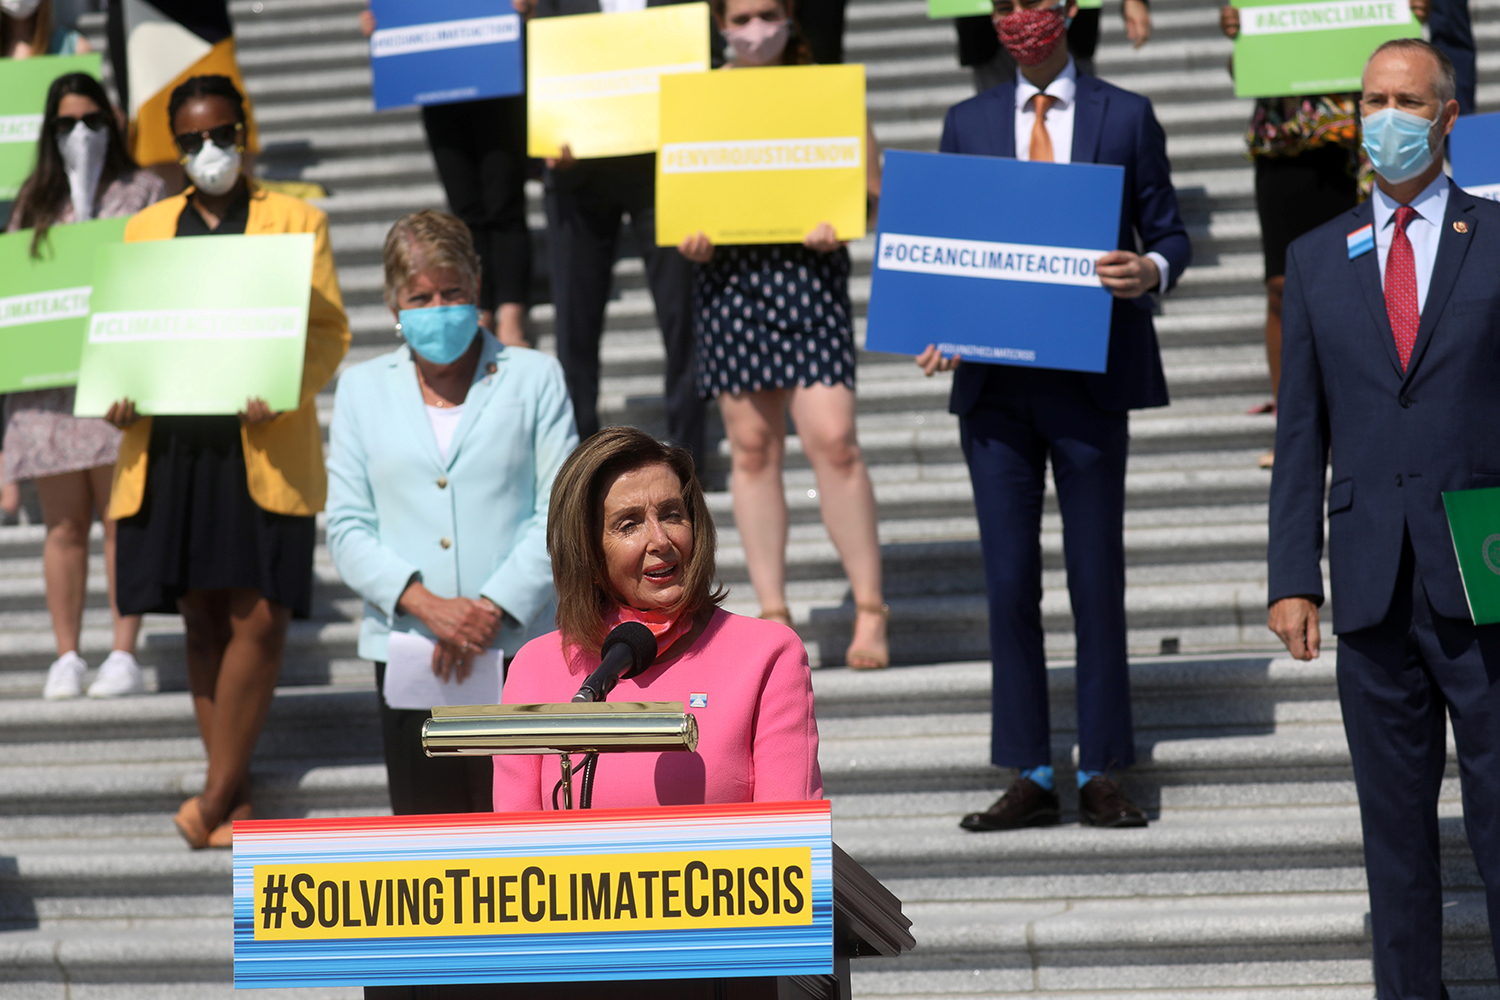 Evaluating House Democrats' new climate change report - Atlantic Council